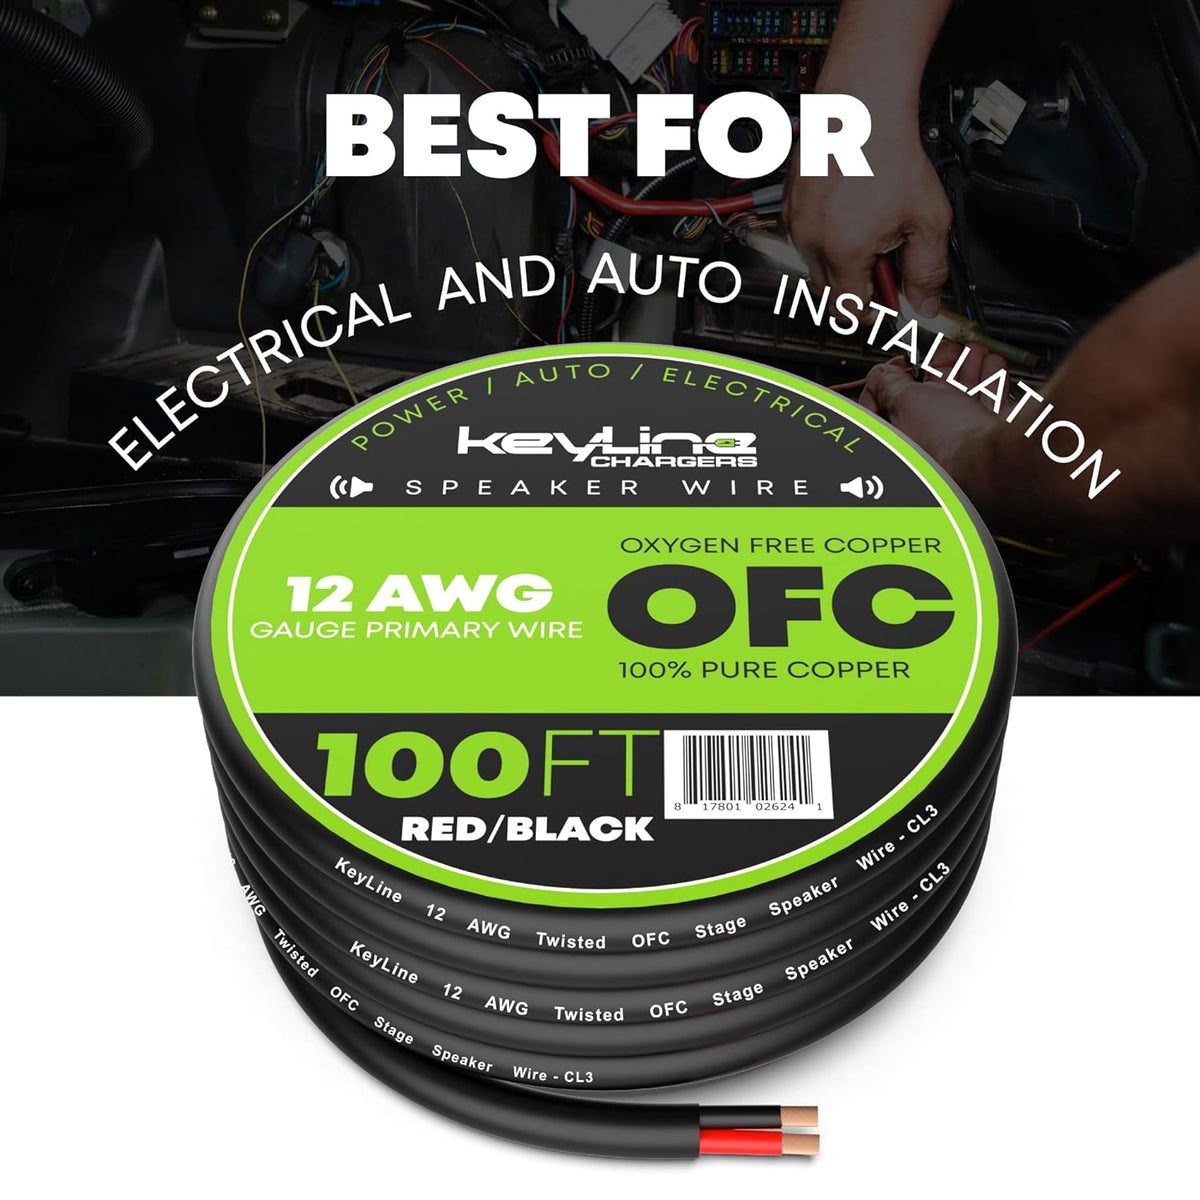 12 Gauge Speaker Wire - 100 Feet Black| 12-2 AWG Gauge - Outdoor Speaker Wire, CL3 CL2 Rated for in Ground Burial & in Wall / 2 Conductors - Marine Speaker Wire OFC Oxygen-Free Copper, Black 100ft